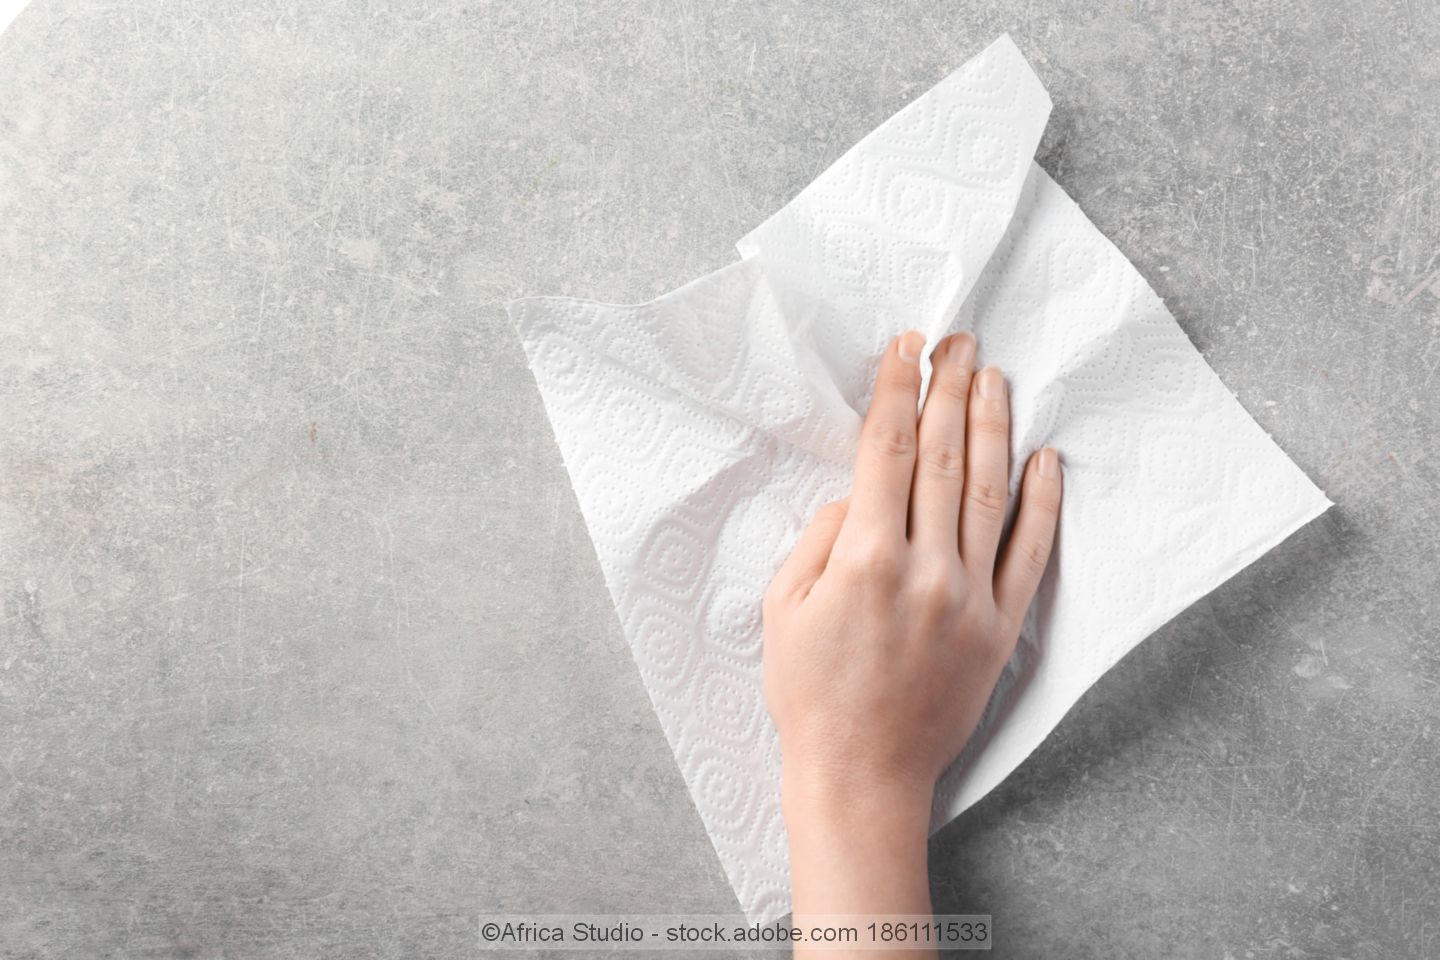 Hand wiping a grey surface with a paper towel